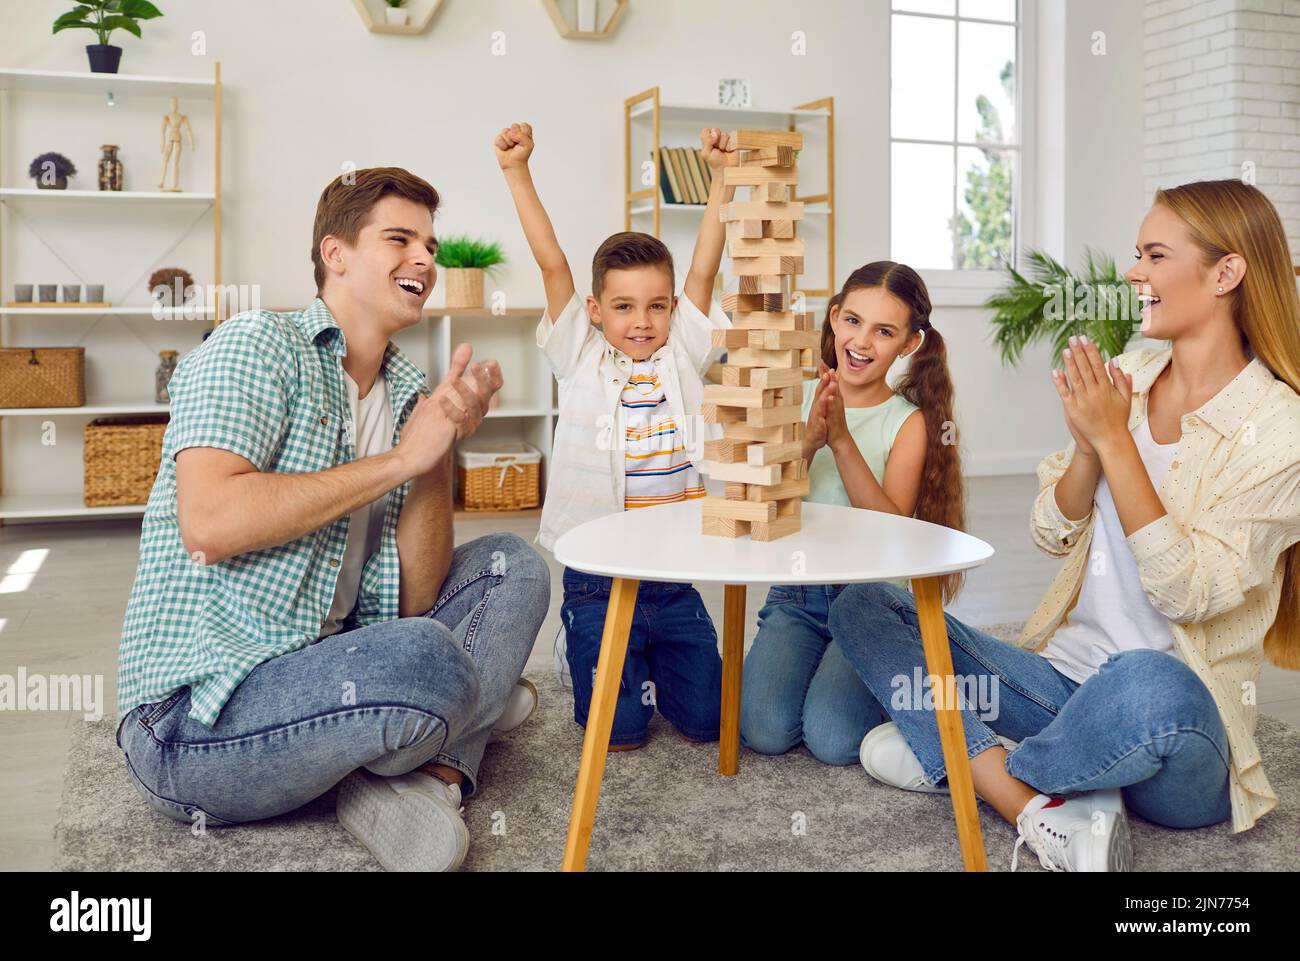 Cheerful and friendly young family with two children is having fun playing Jenga together. Stock Photo